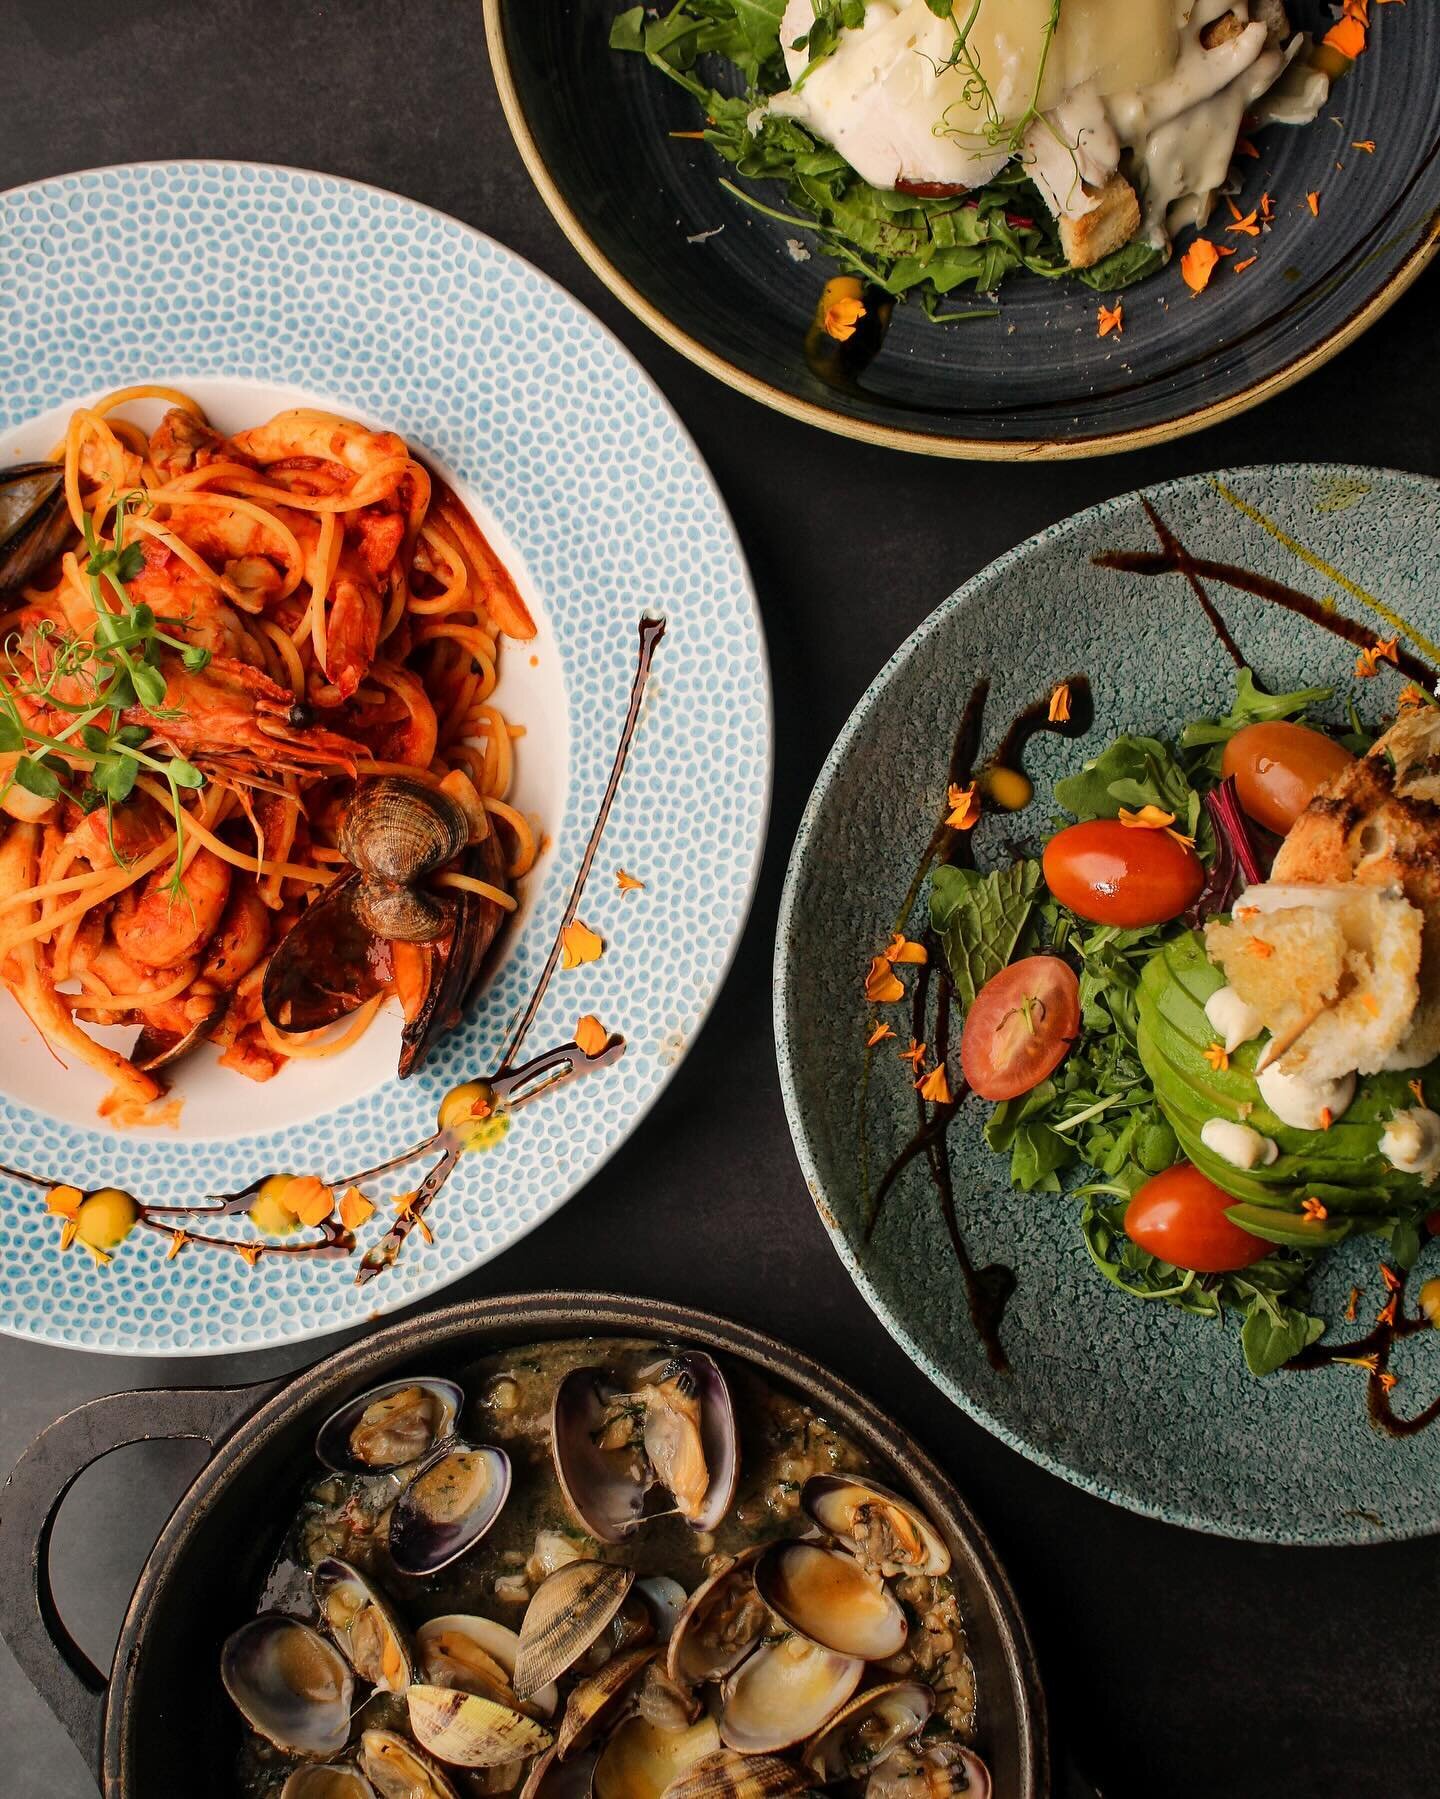 &ldquo;Dive into a sunny feast in the heart of the Mediterranean! 🌊 Our restaurant invites you to savour a symphony of vibrant Mediterranean flavours , fresh and colourful delights that will tantalise your taste buds. 

From the freshness of crisp s